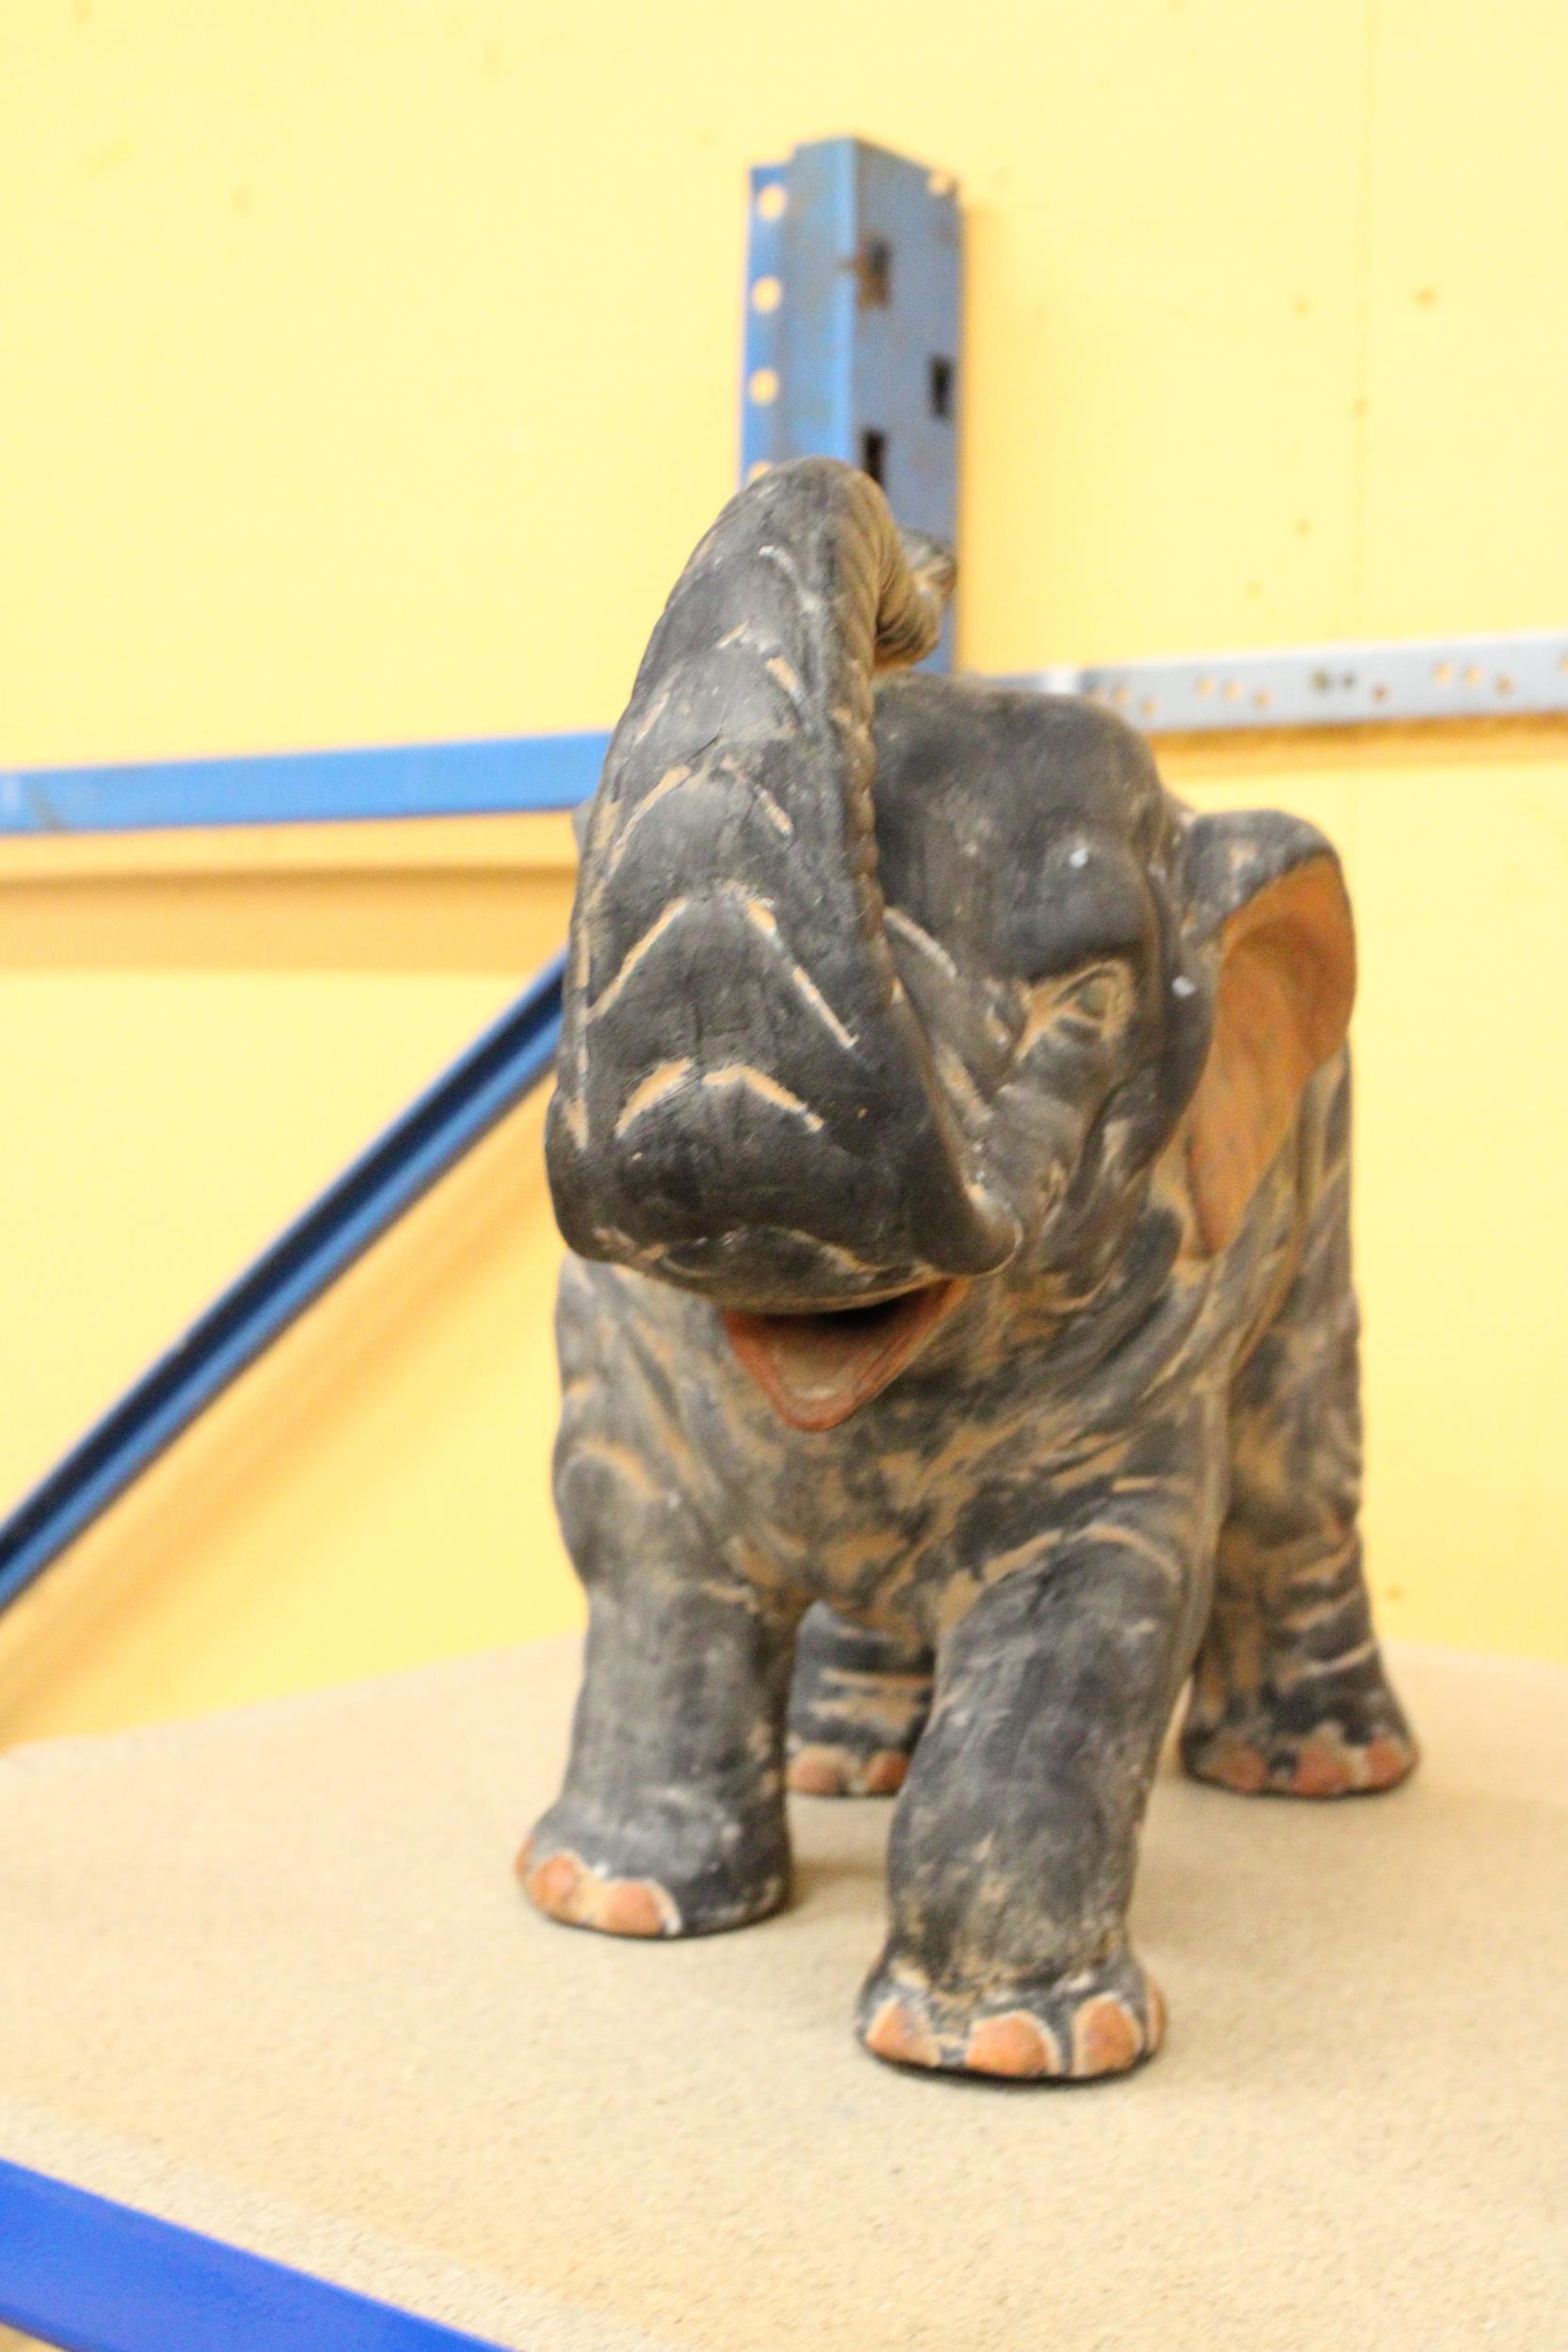 A LARGE STONE WARE ELEPHANT ORNAMENT - Image 2 of 4